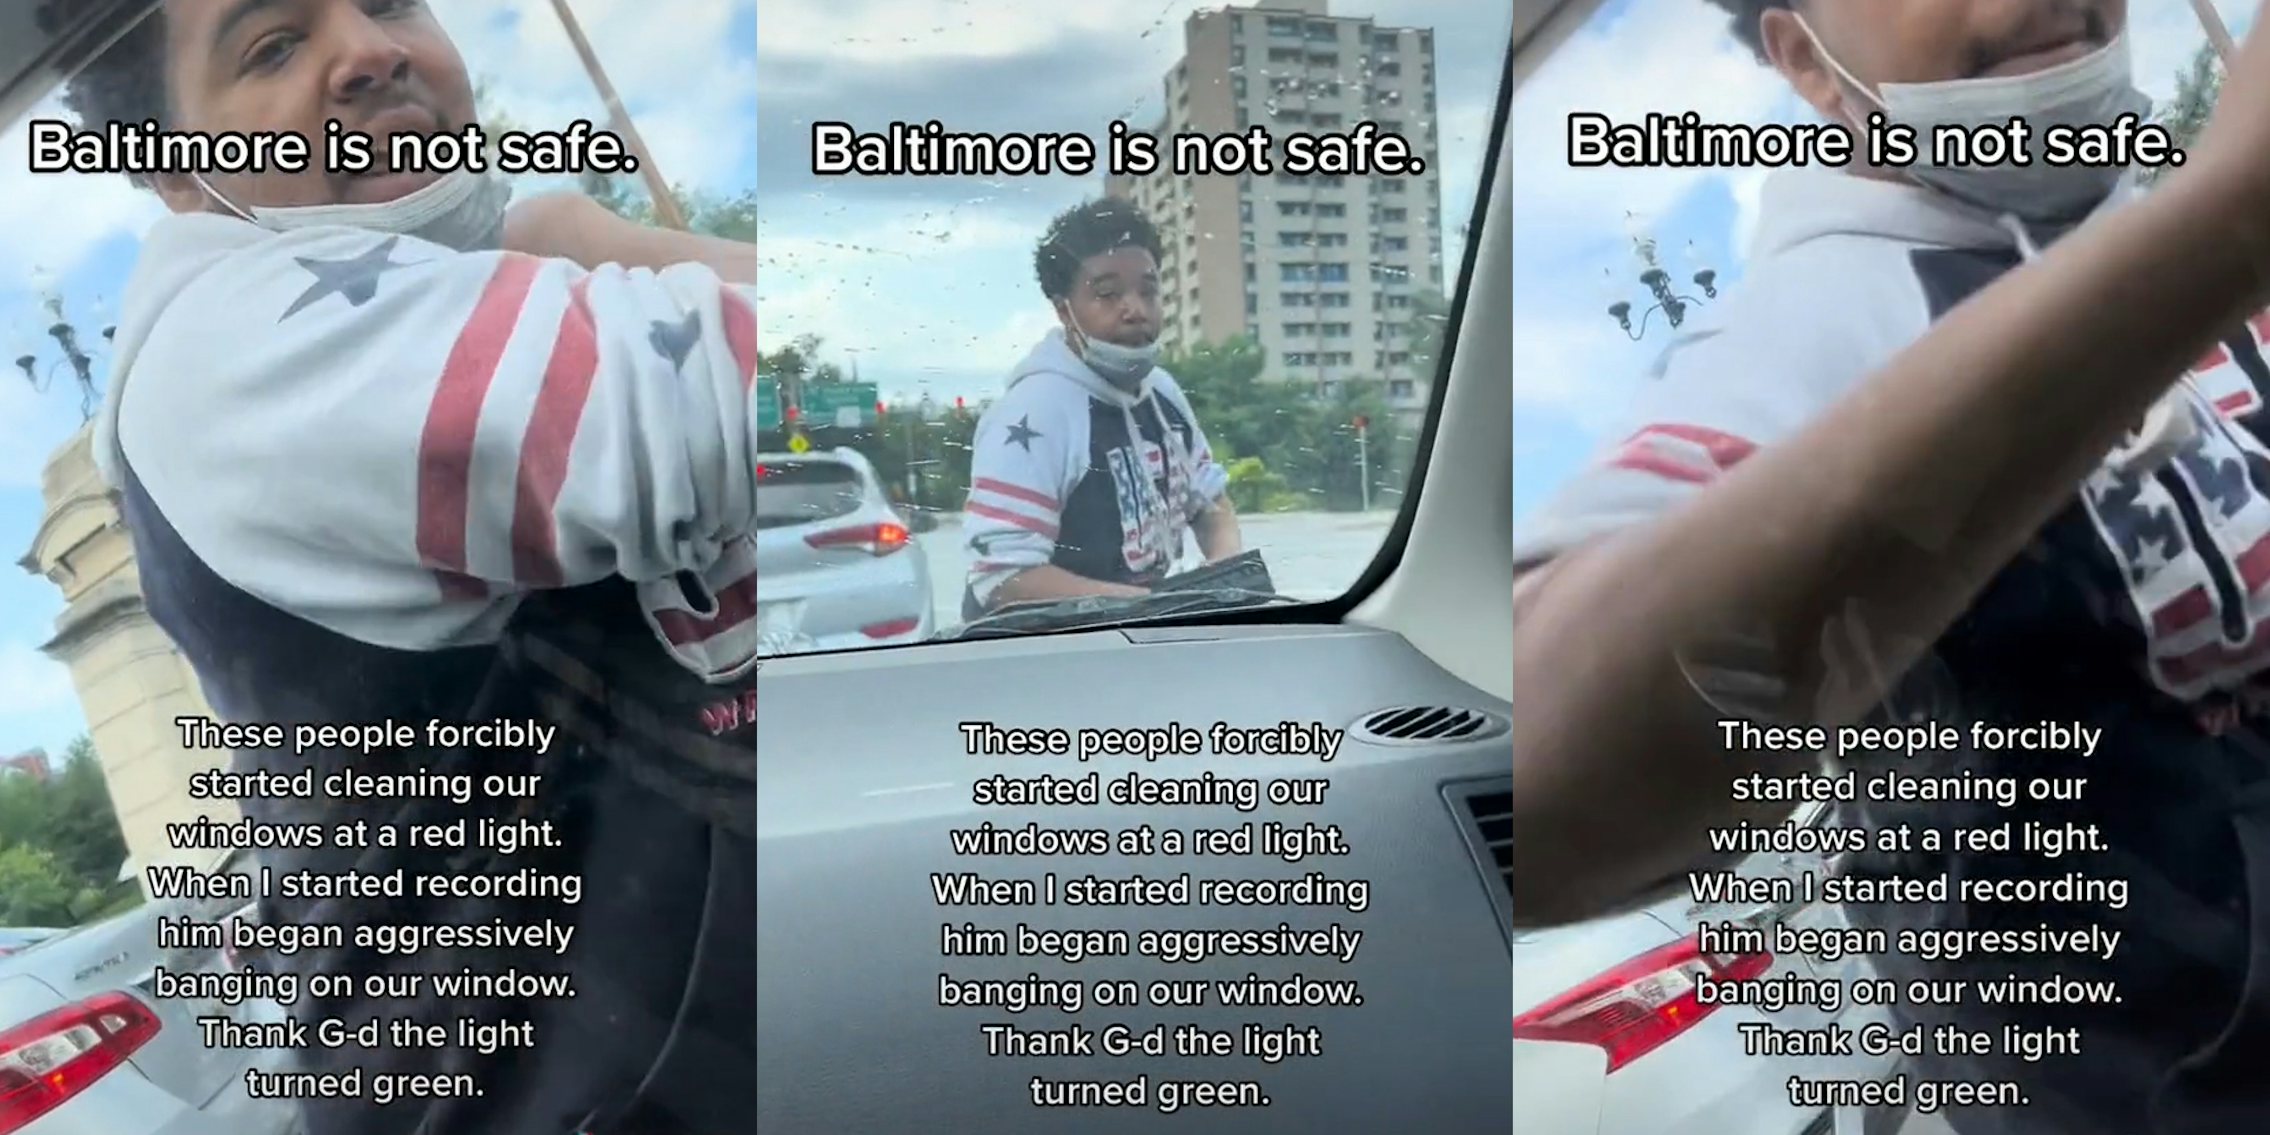 man hitting window with arm passenger side caption 'Baltimore is not safe' 'These people forcibly started cleaning our windows at a red light. When I started recording him began aggressively banging on our window. Thank G-d the light turned green.' (l) man walking around front of car at red light caption 'Baltimore is not safe' 'These people forcibly started cleaning our windows at a red light. When I started recording him began aggressively banging on our window. Thank G-d the light turned green.' (c) man hitting passenger side window with arm caption 'Baltimore is not safe' 'These people forcibly started cleaning our windows at a red light. When I started recording him began aggressively banging on our window. Thank G-d the light turned green.' (r)